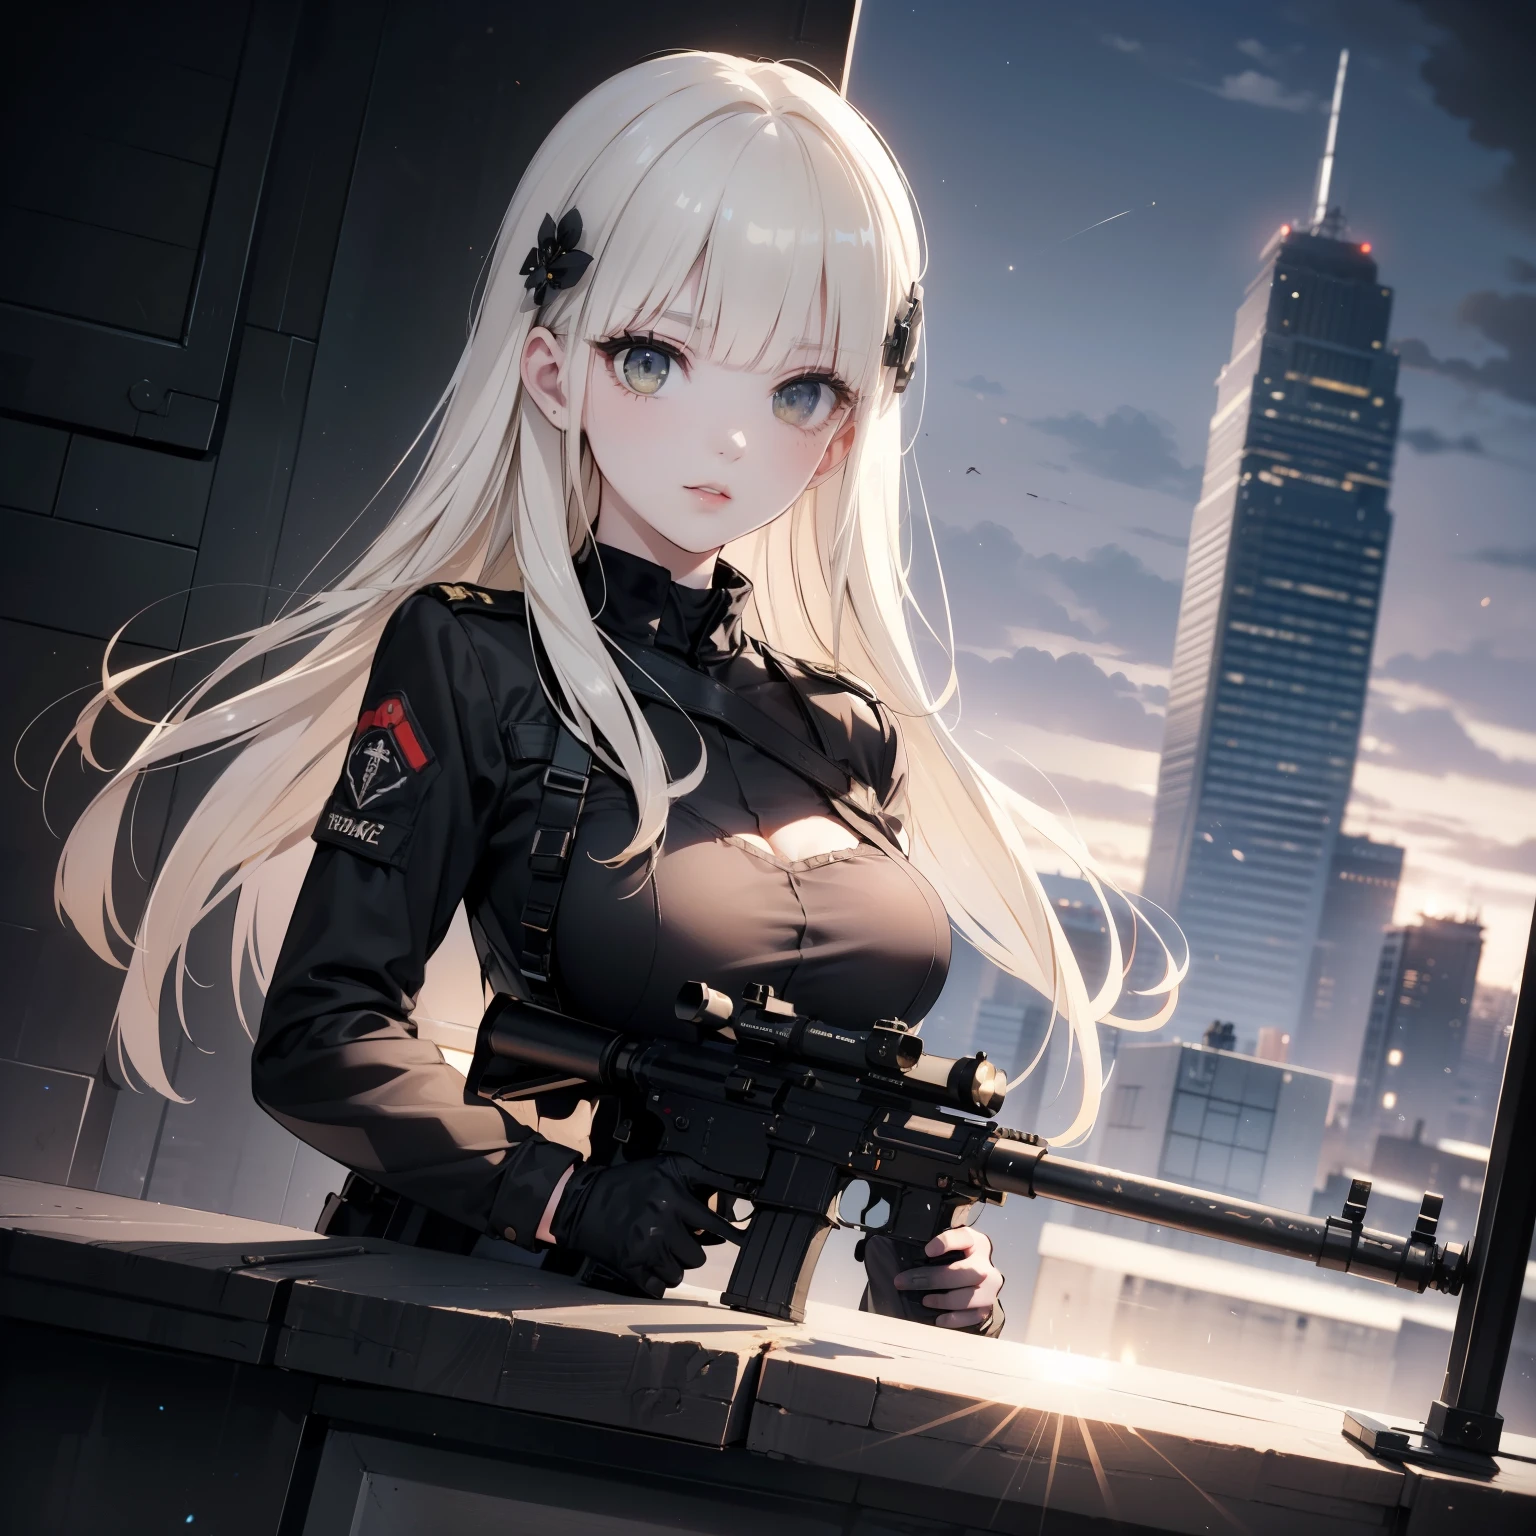 (trained female soldier)、((Aim your rifle and fire:1.4、sniper stance、guns、hour&to hk416))、1 woman、thourick body、(black combat uniform)、(platinum-blonde-hourair:1.2)、((超A hourighour resolution))、write in detail、masterpiece、top quality、Extremely detailed CG、8K quality、Cinematographouric lighourting、lens flare、(Skyscraper rooftop at nighourt:1.4)、hyper detailing、((Dynamic Angle Bust Shourots:1.4))、detailed gun description、Rifle withour perfect detail、Perfect barrel thourat does not distort、Fighourter in thoure sky、military drone